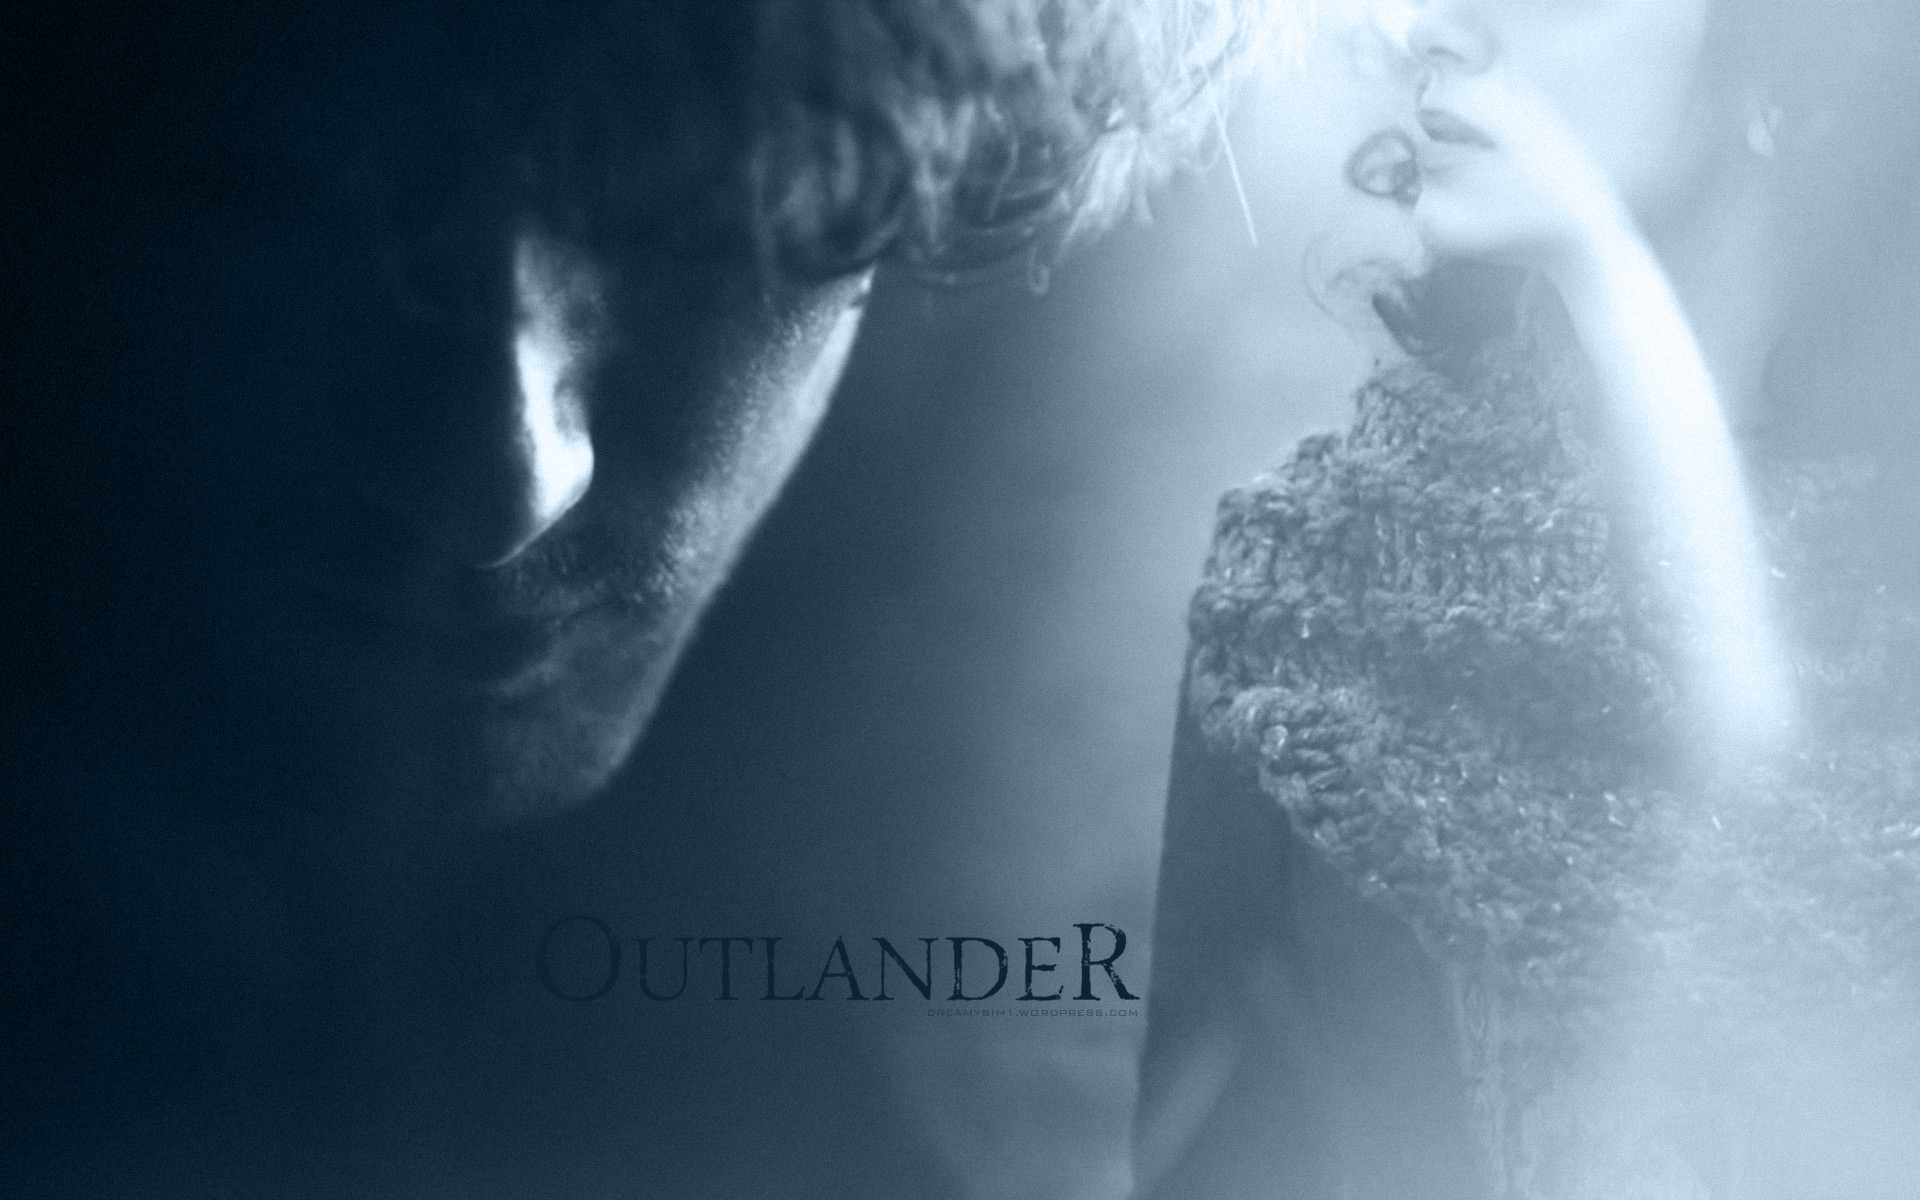 Looking For An Outlander Wallpaper We Ve Got You Covered HD Wallpapers Download Free Map Images Wallpaper [wallpaper684.blogspot.com]